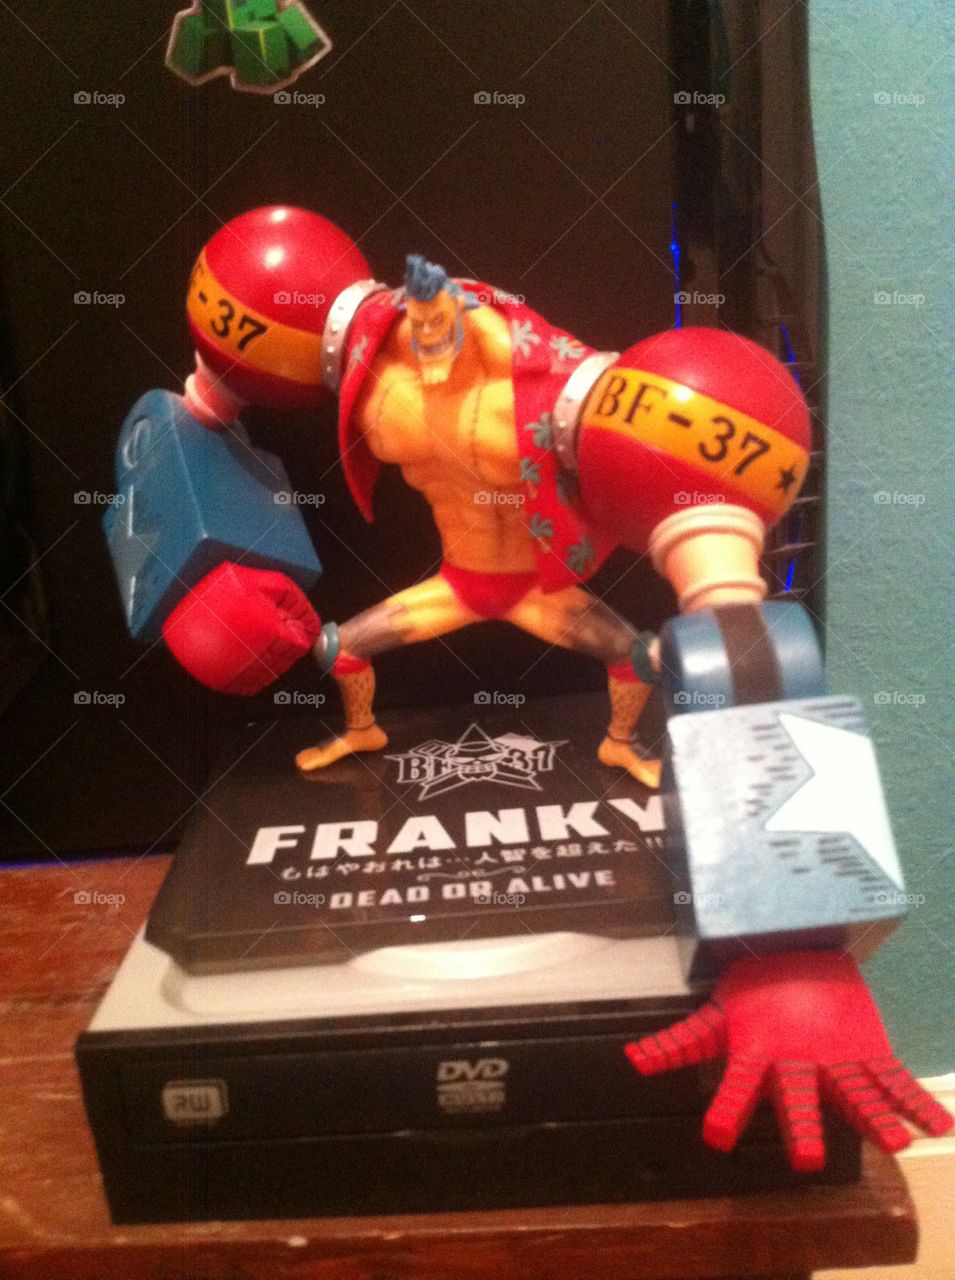 Franky One Piece Figurine. A Super Franky One Piece Photo with his awesome android body parts. 